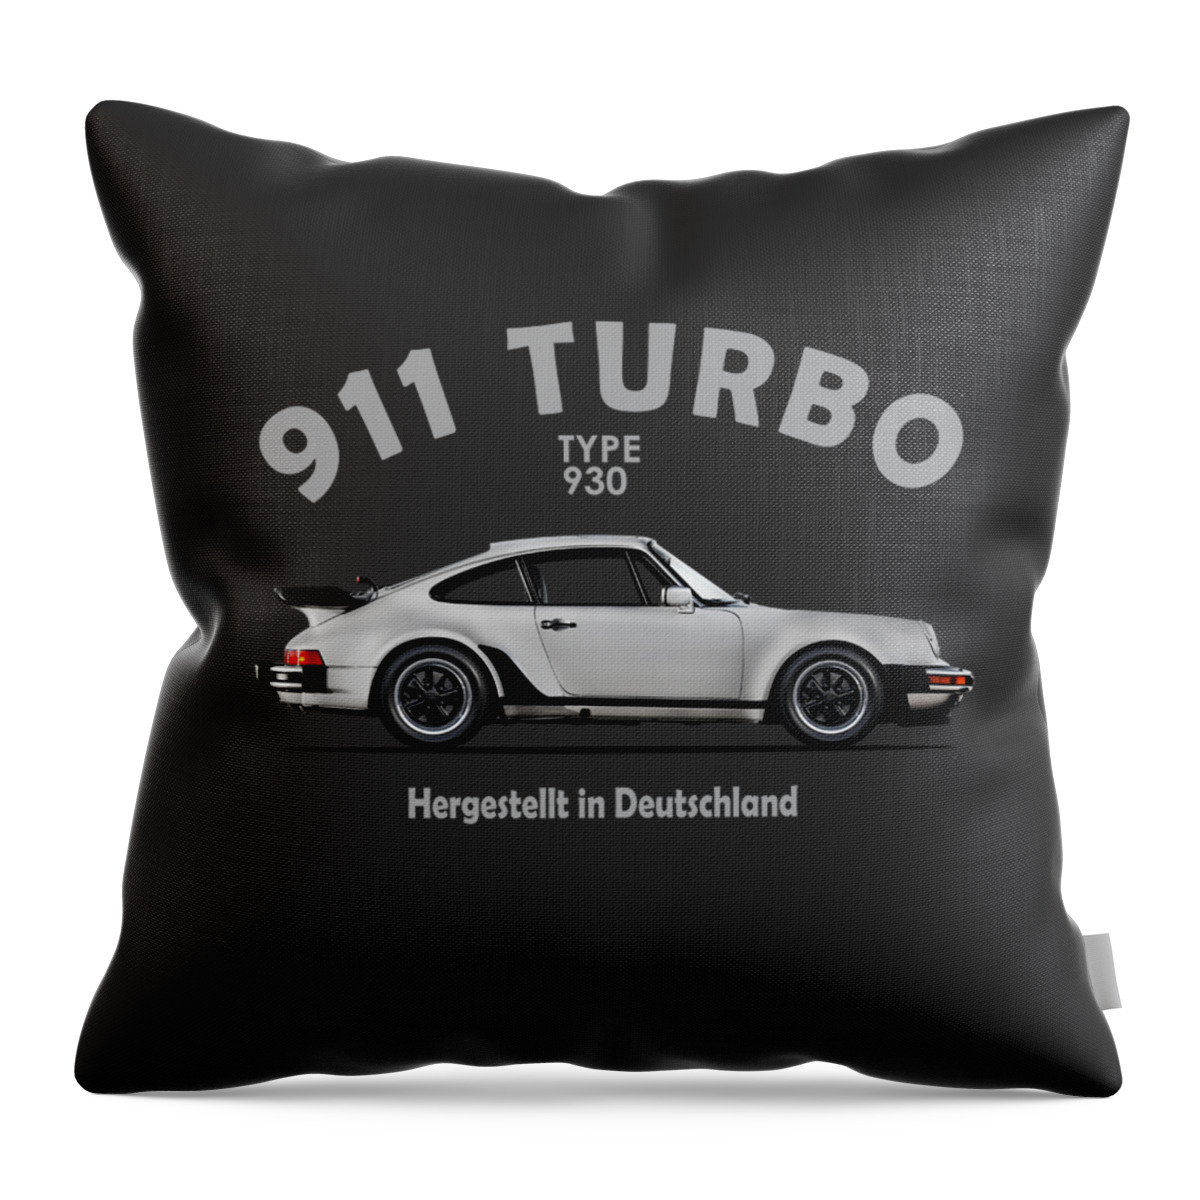 Porsche 911 Turbo Throw Pillow featuring the photograph The 911 Turbo 1984 by Mark Rogan